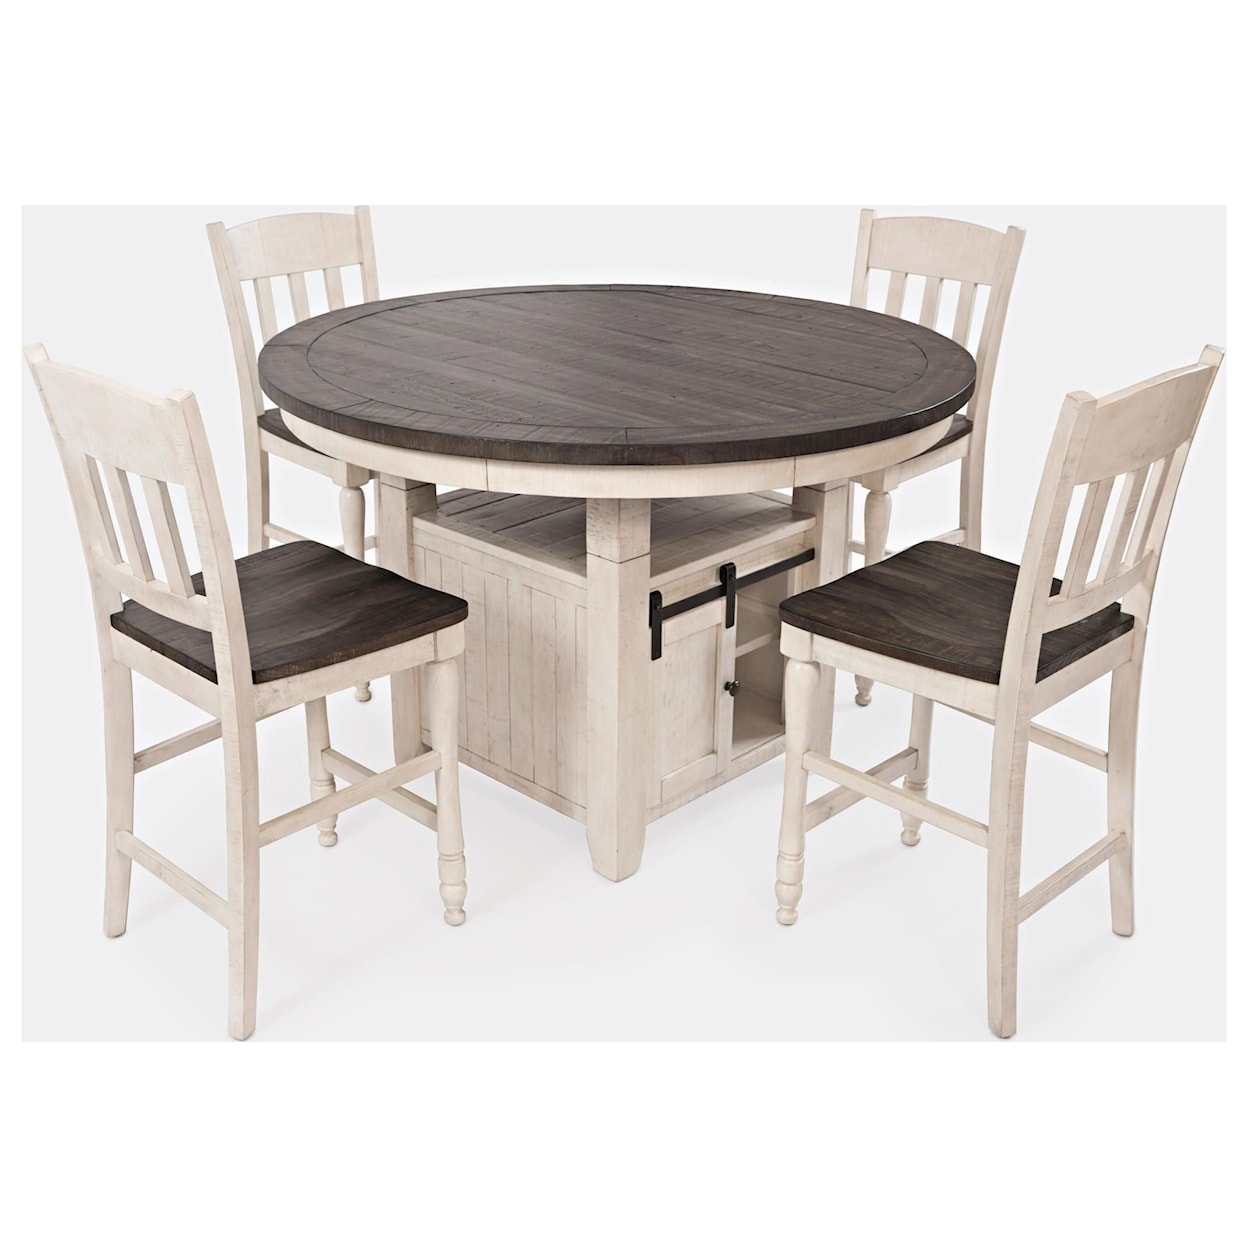 VFM Signature Morgan County Counter Height Dining Package